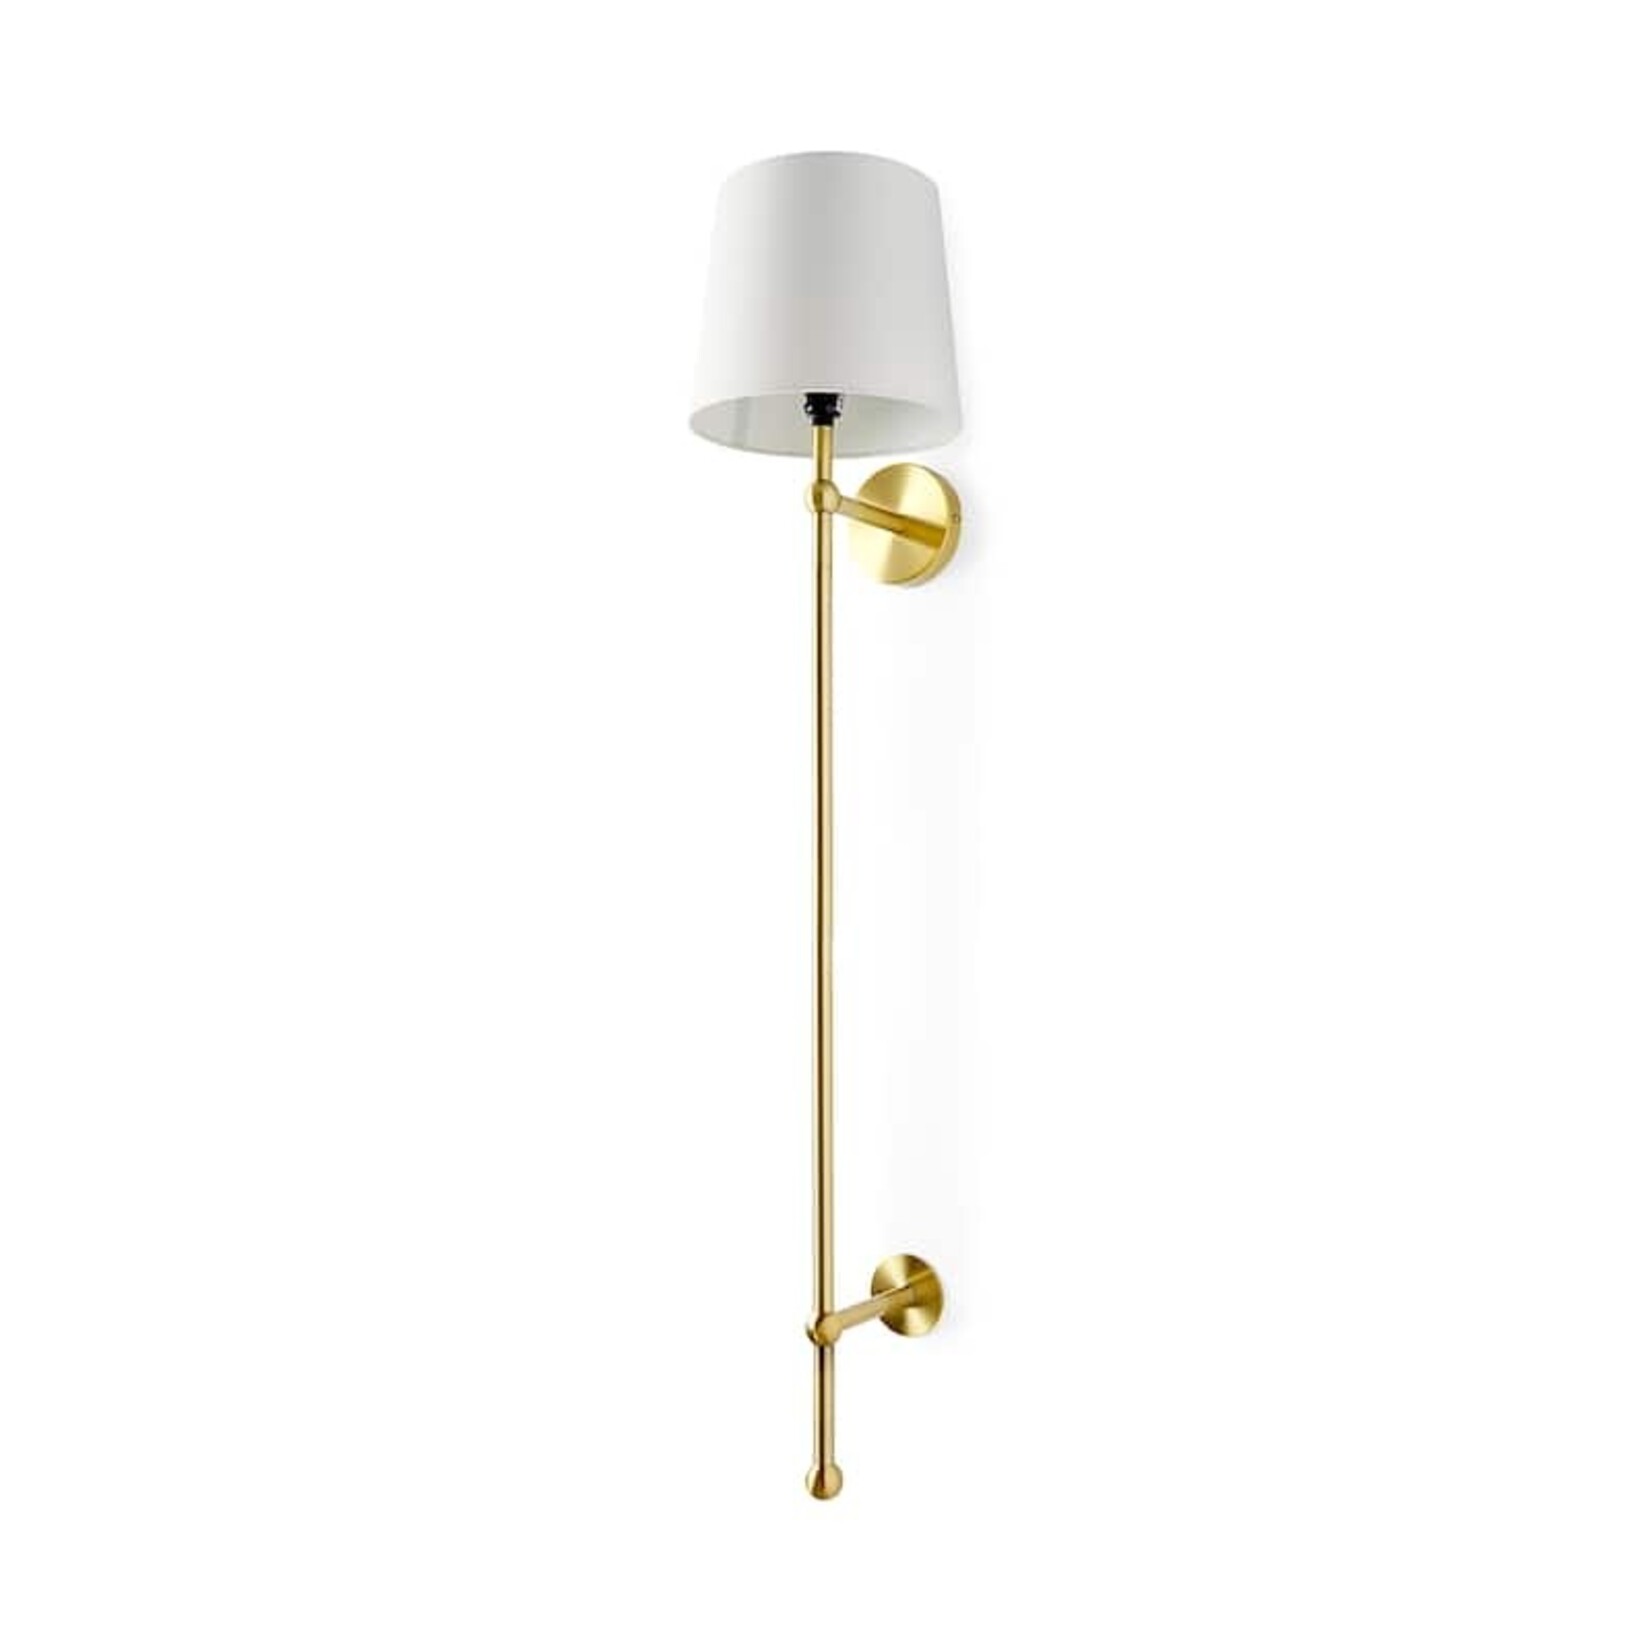 Chester Wall Sconce - Gold Metal w/ Cream Fabric Shade